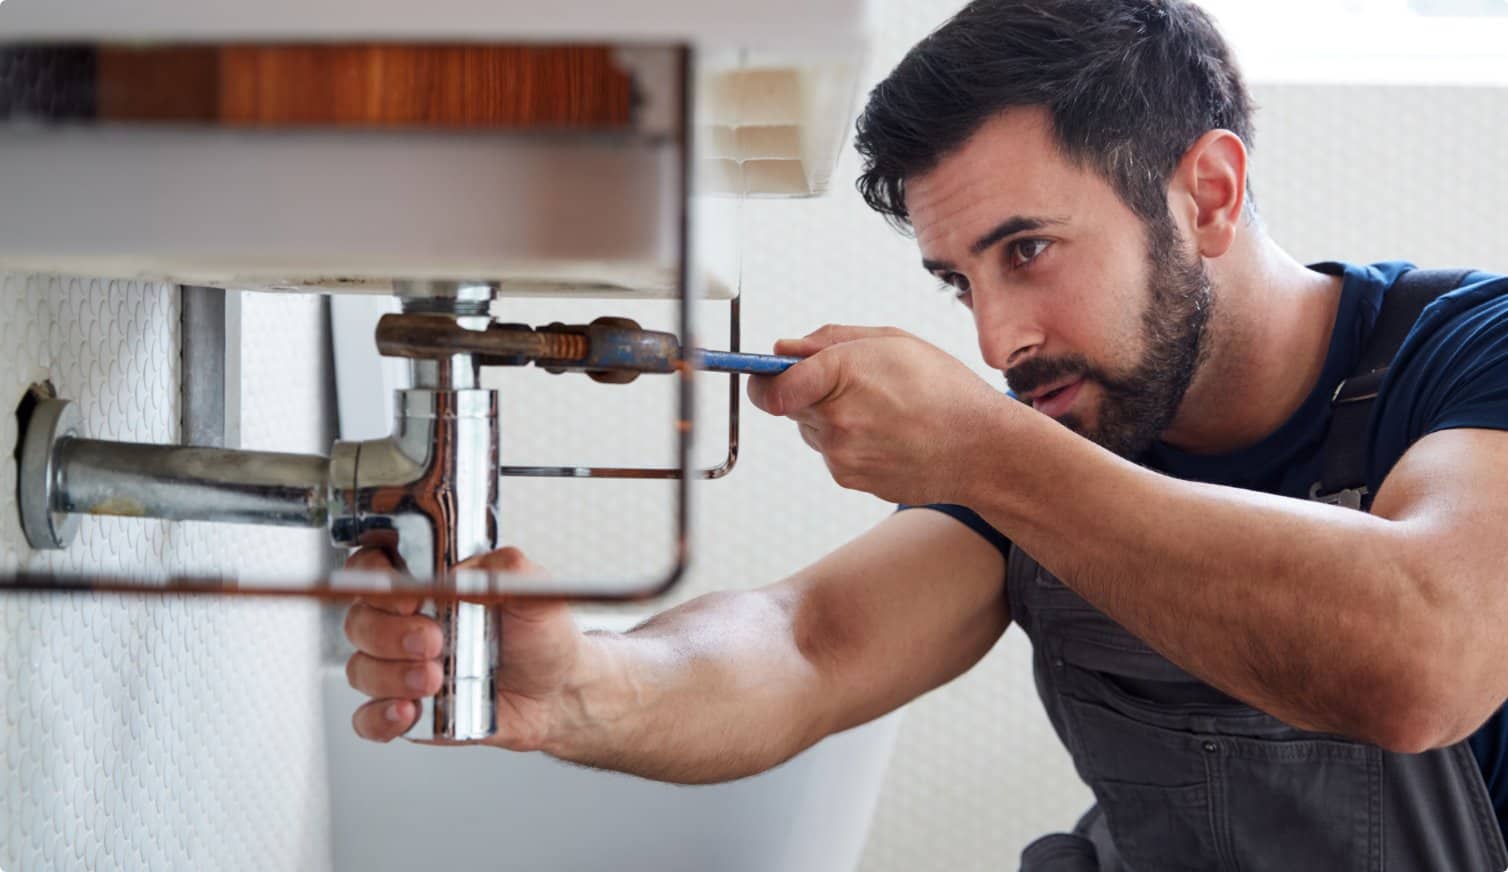 A plumber fixing a sink in a bathroom.